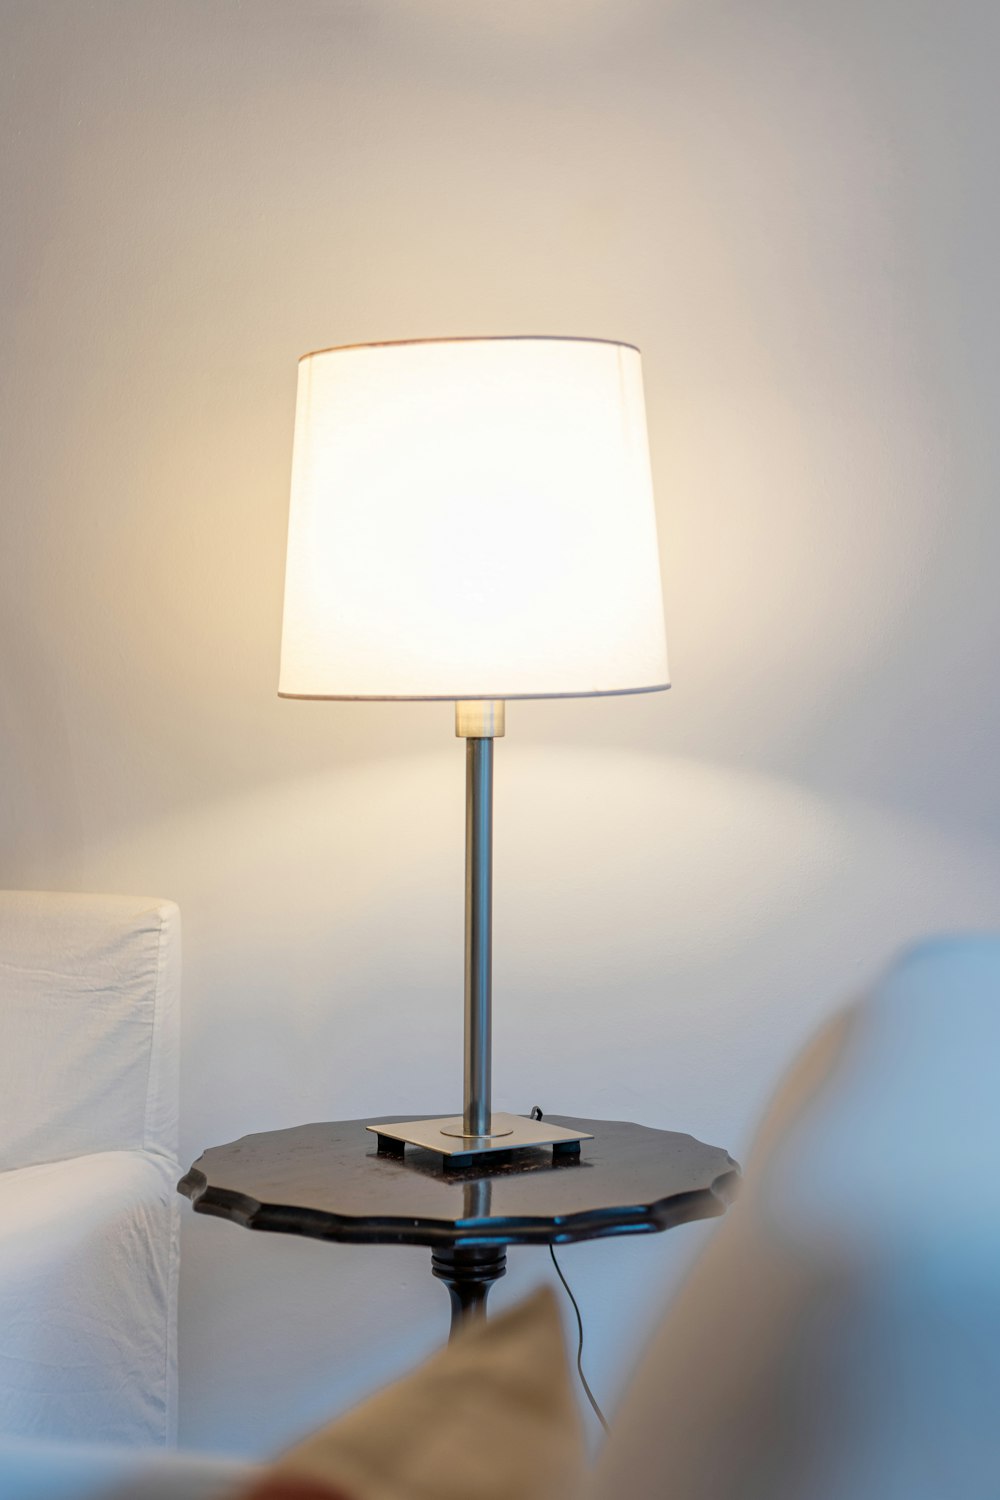 a lamp on a table in a room